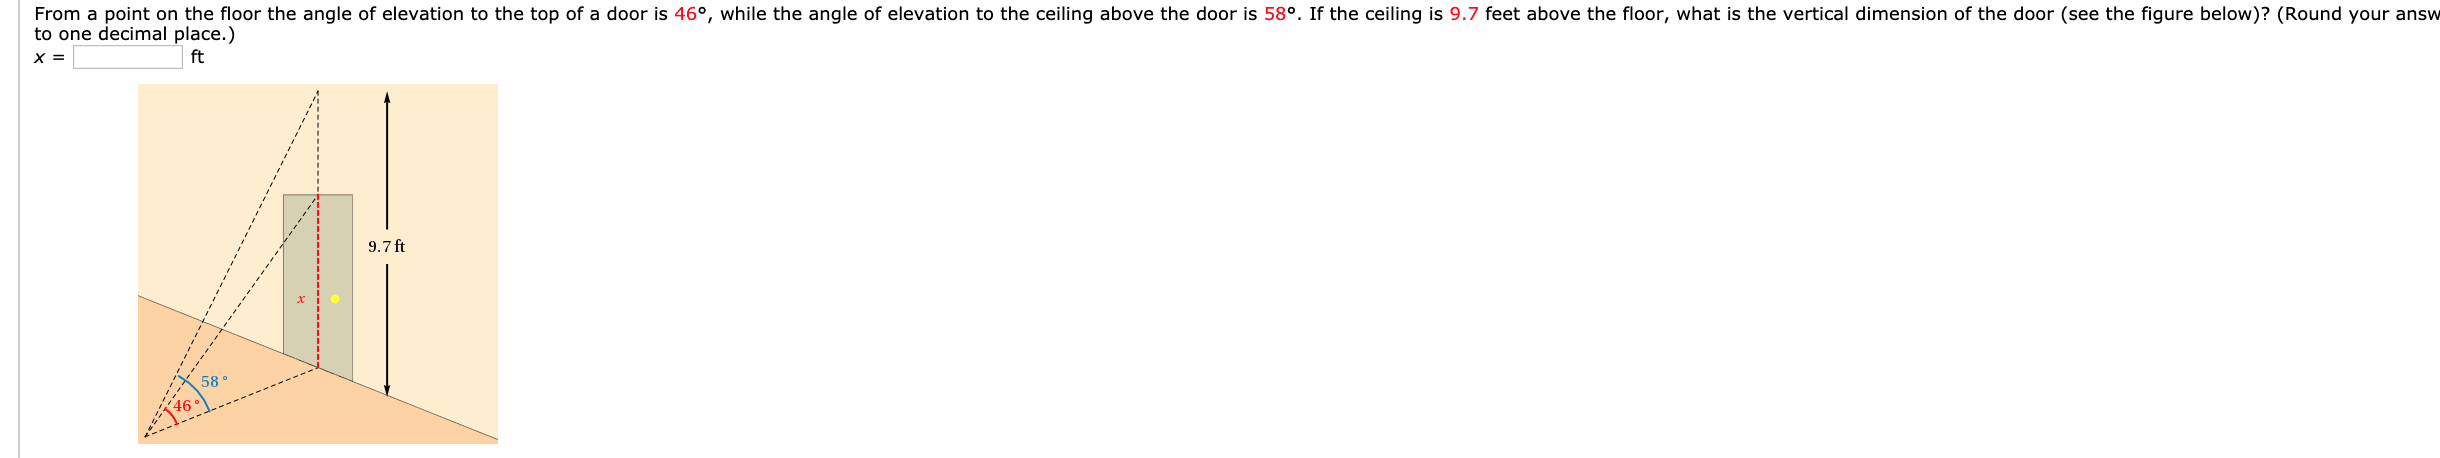 From a point on the floor the angle of elevation to the top of a door is 46°, while the angle of elevation to the ceiling above the door is 58°. If the ceiling is 9.7 feet above the floor, what is the vertical dimension of the door (see the figure below)? (Round your answ
to one decimal place.)
ft
9.7 ft
58 °
